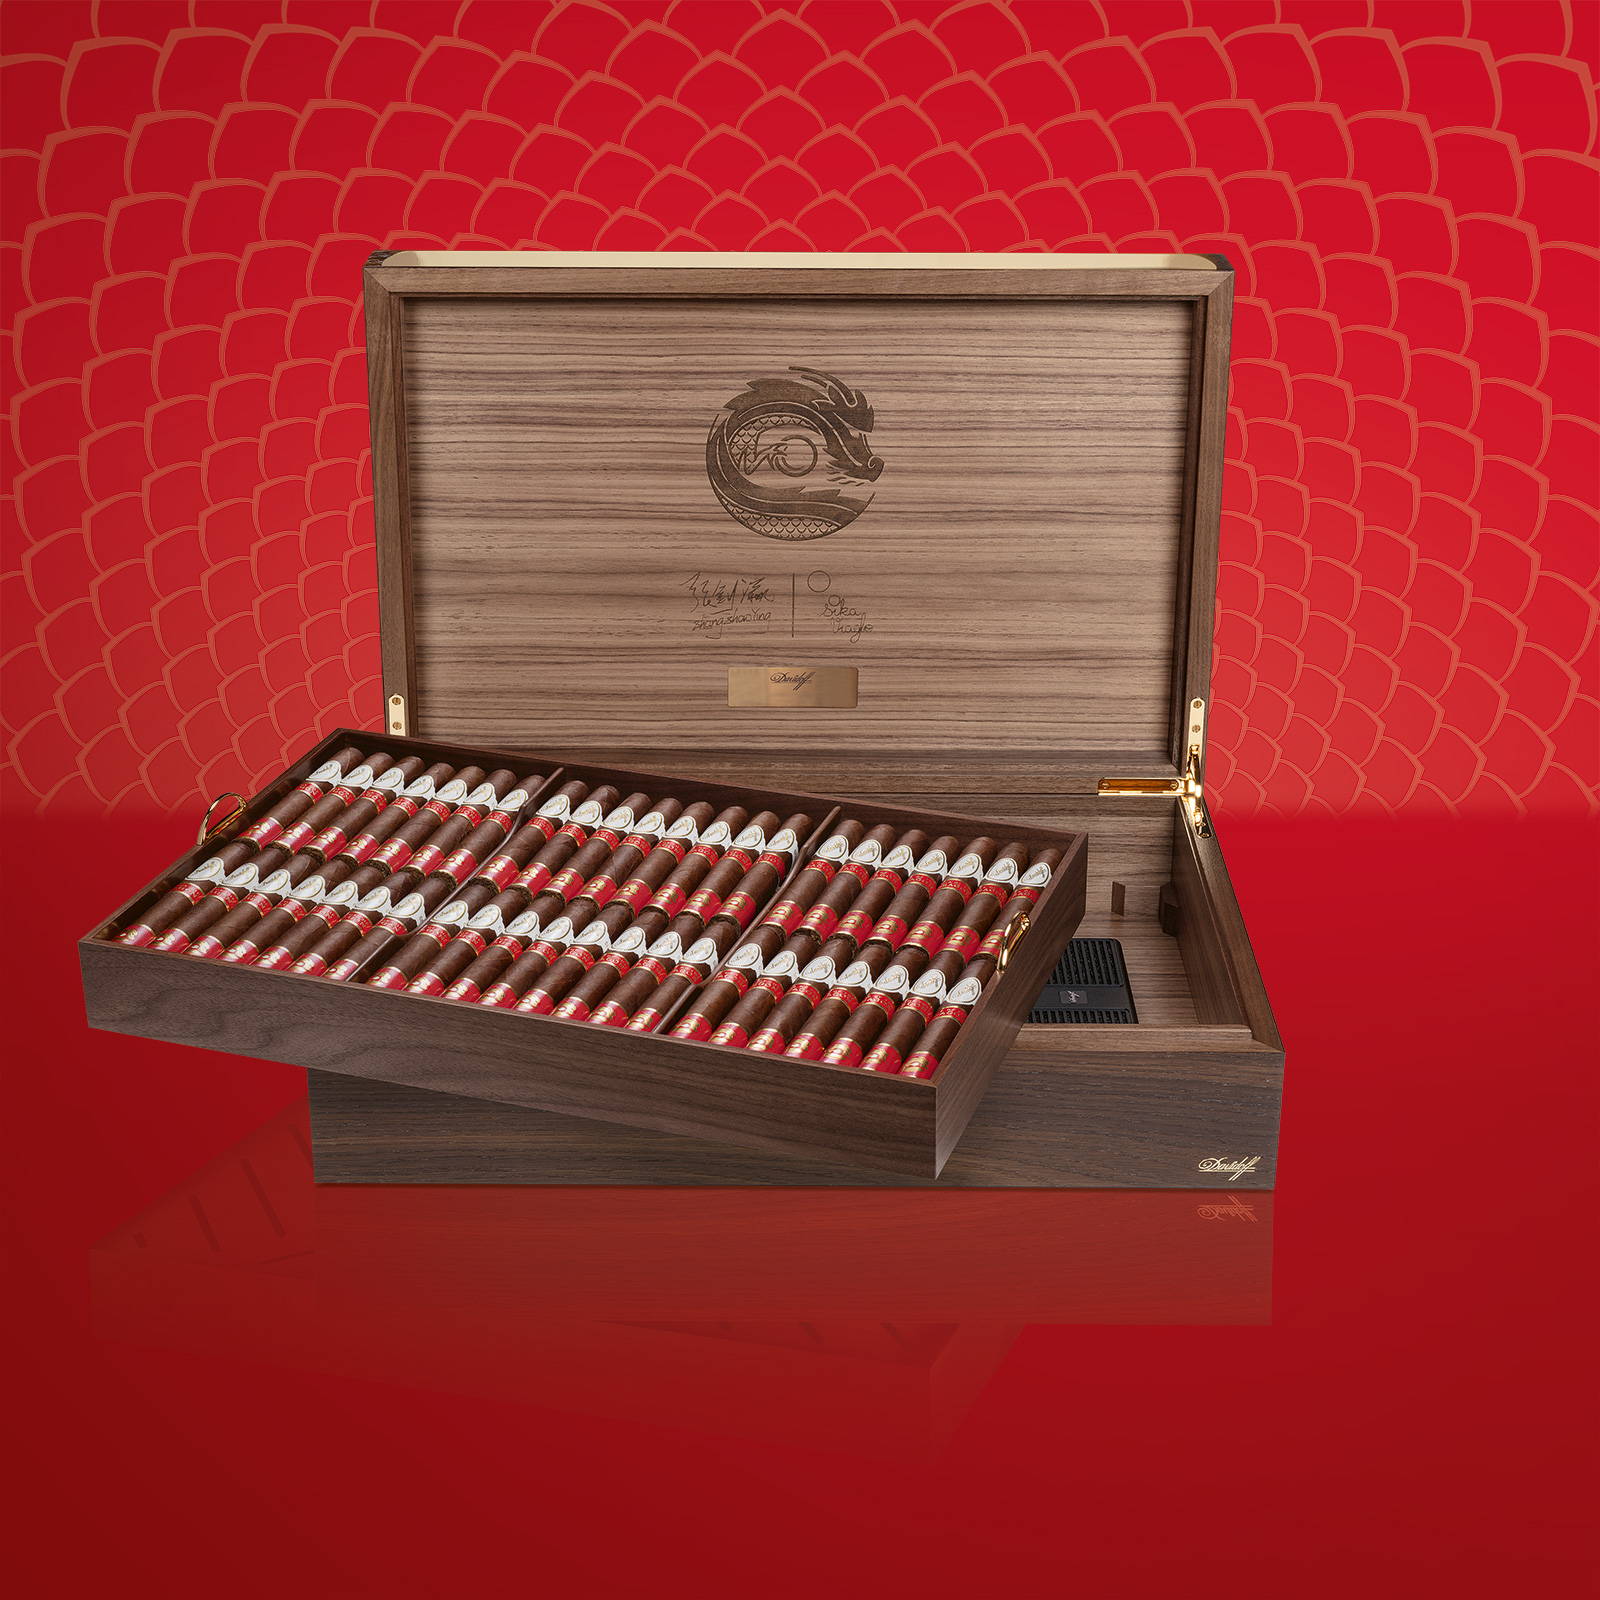 The opened Davidoff Year of the Dragon Masterpiece Humidor with a tray filled with cigars.